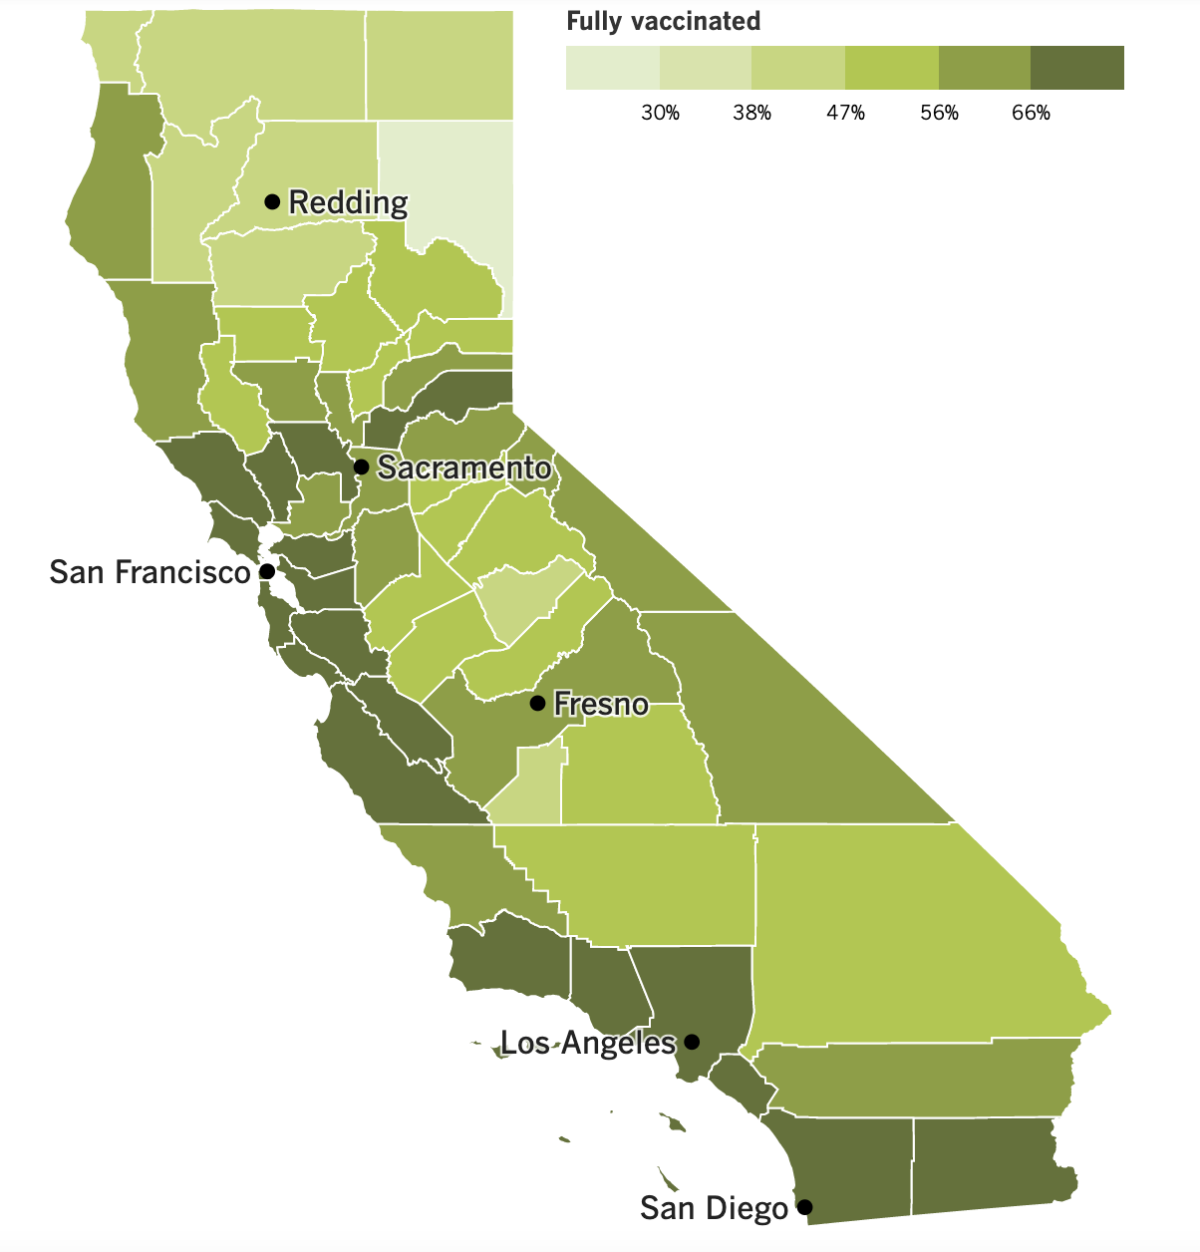 A map that shows the state's vaccination progress by county.